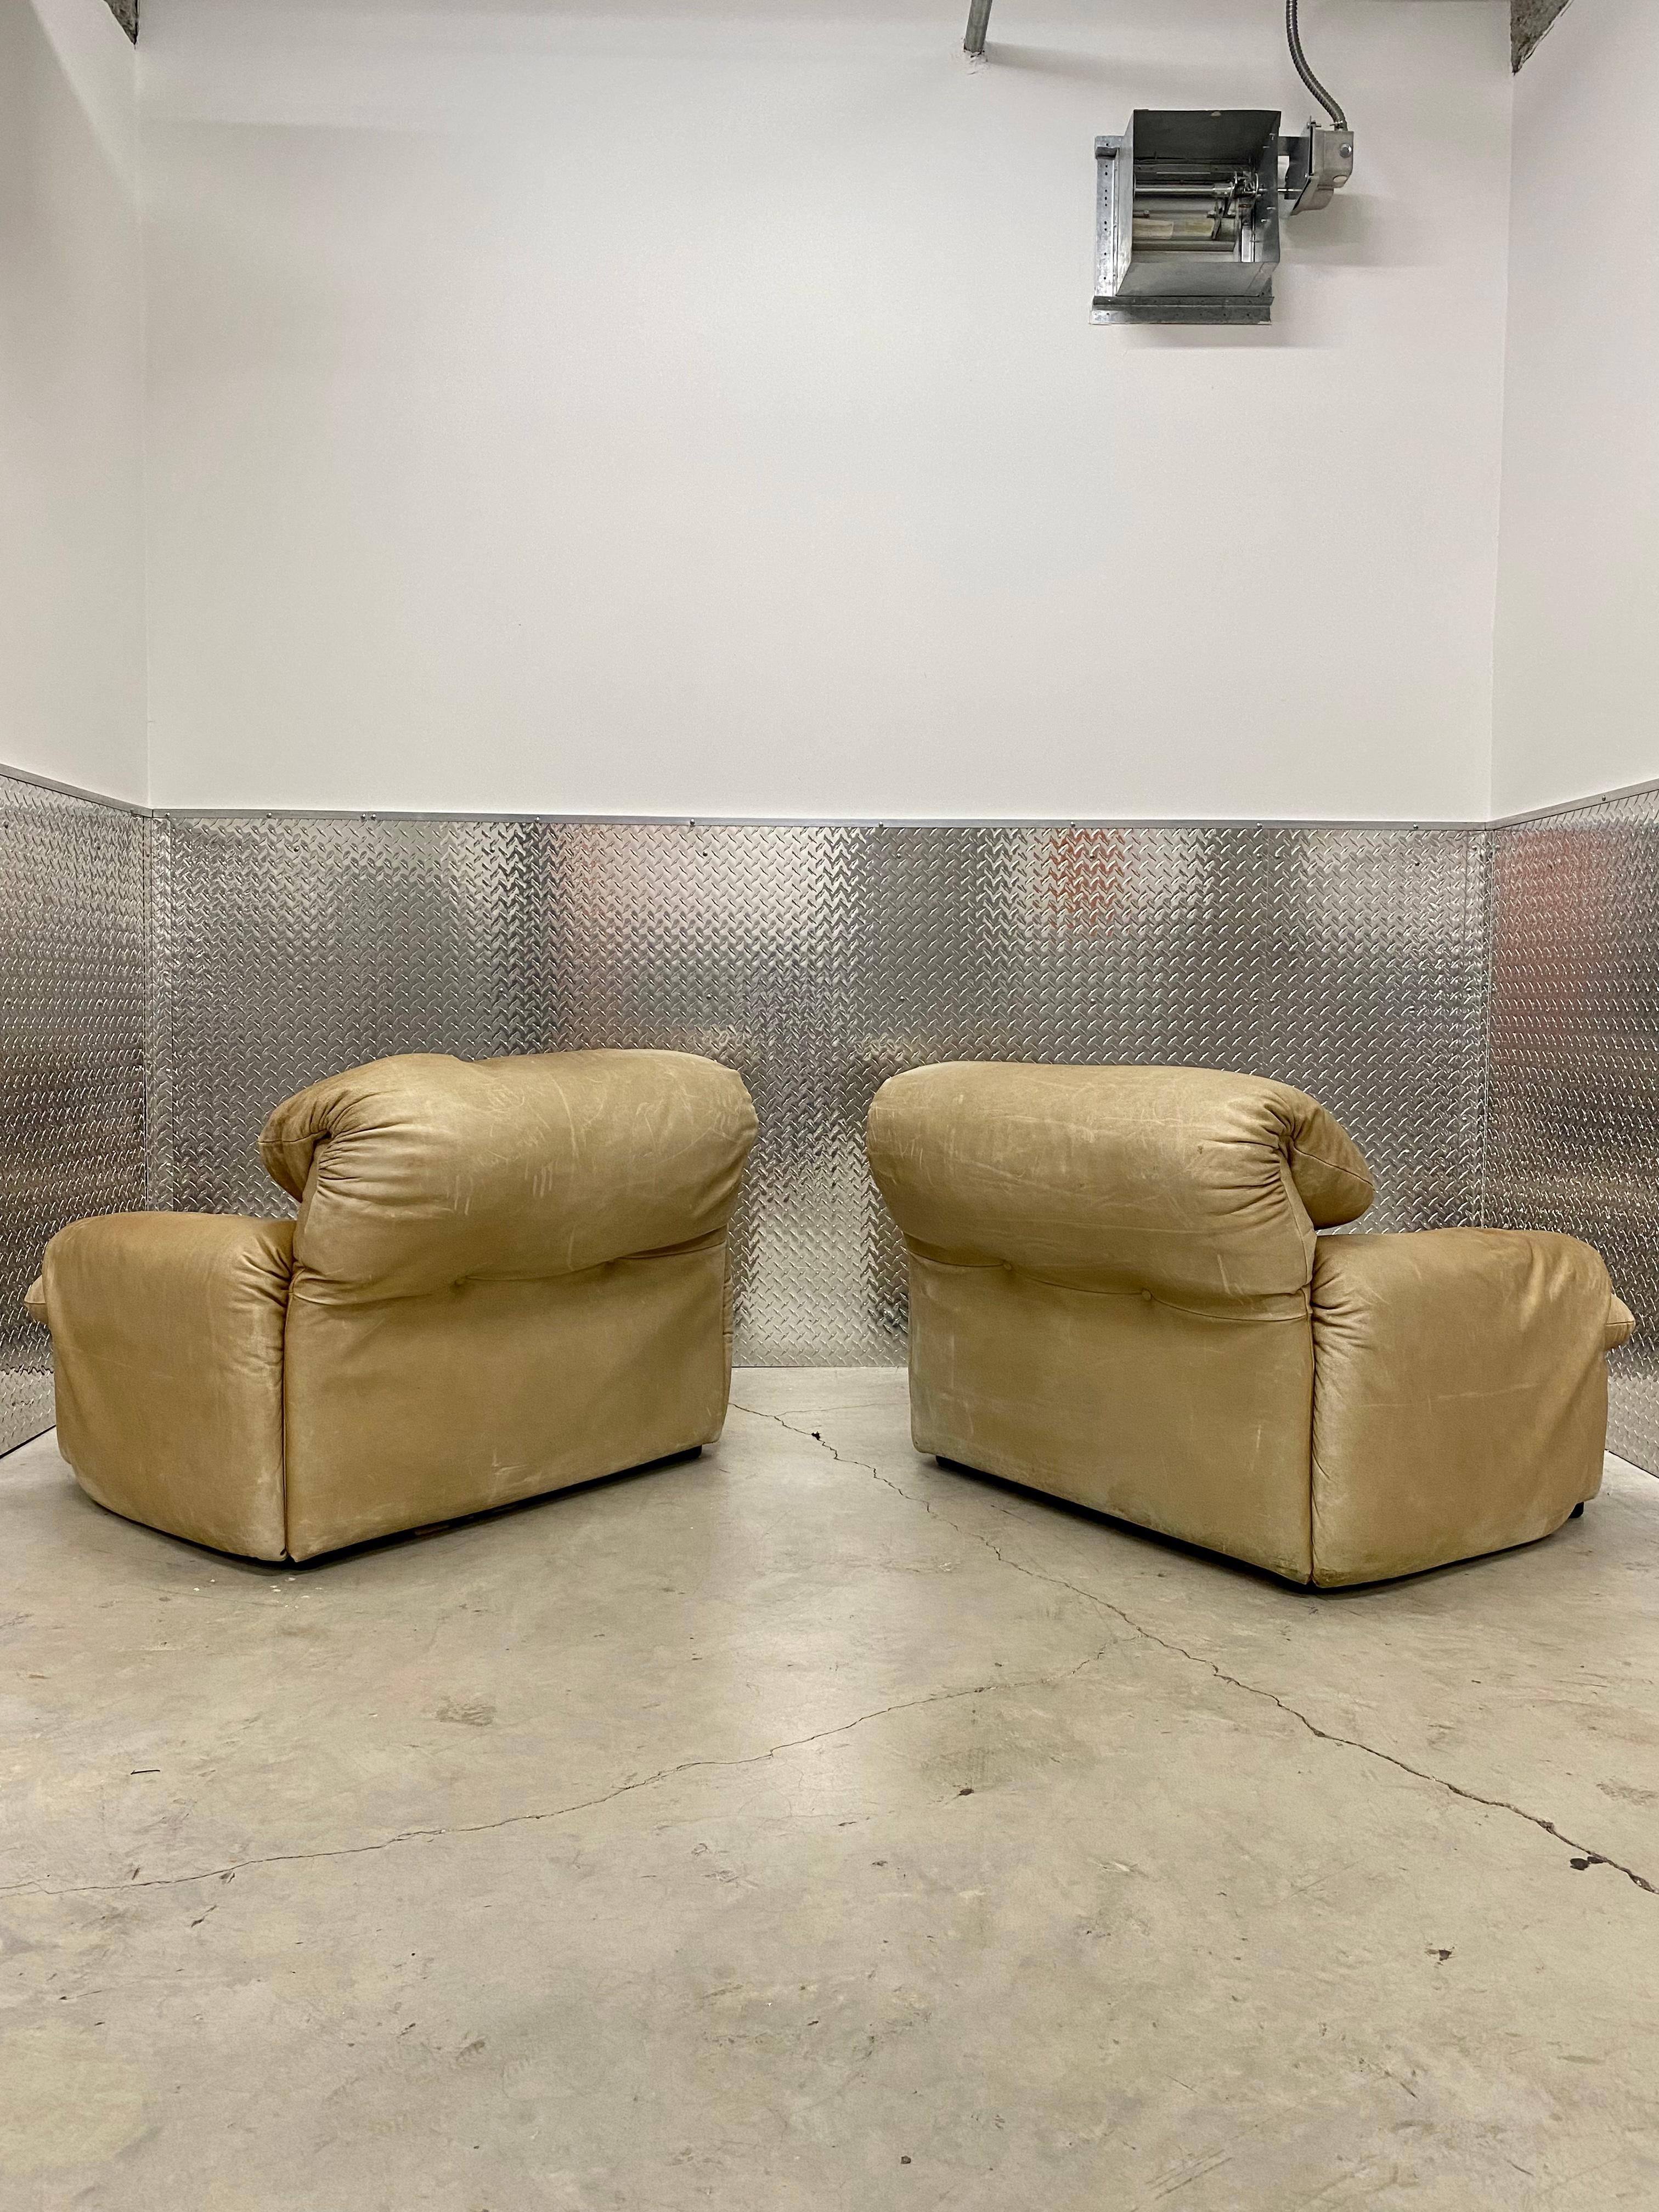 Attributed to Cassina Rare Cube Maralunga Leather Chairs and Ottoman, Set of 3 In Good Condition For Sale In Fort Lauderdale, FL